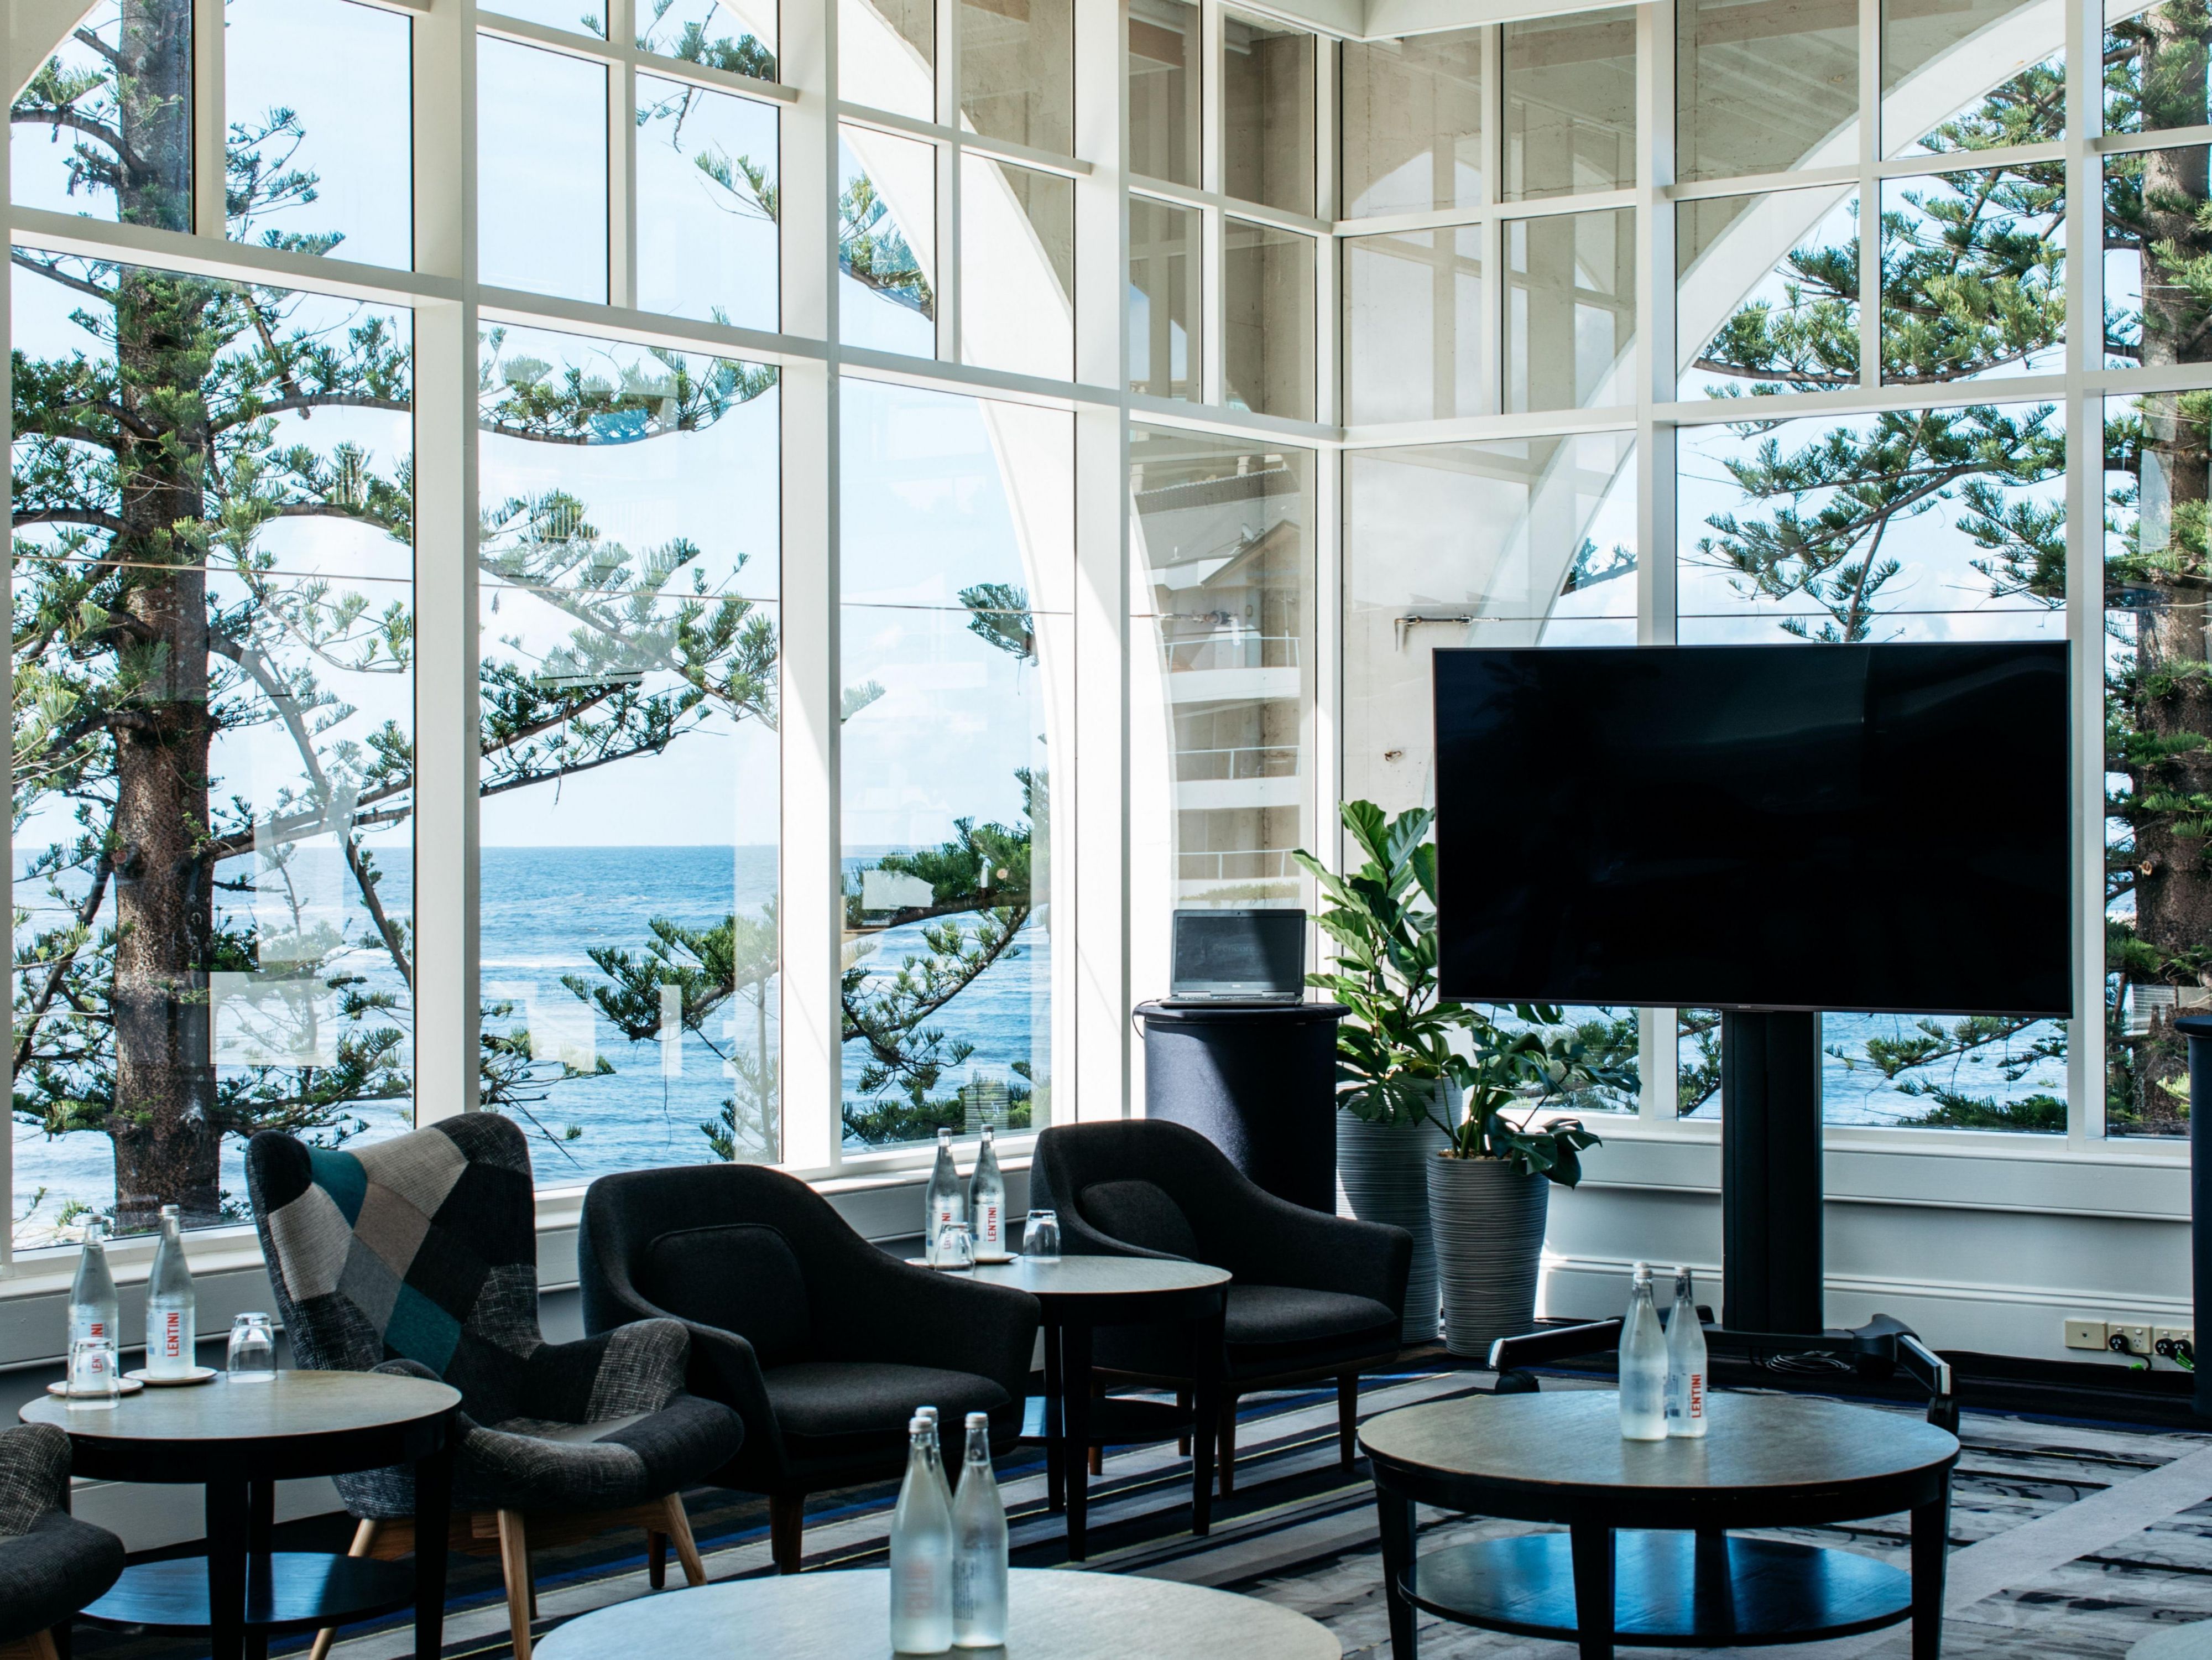 Leave the boardroom behind and achieve more productive meeting outcomes at Crowne Plaza Terrigal Pacific. Offering a variety of modern and versatile spaces catering up to 350 delegates. Our award-winning hotel in the beautiful beachside just 90 minutes drive north of Sydney, is the ultimate venue for your next meeting, conference or event. 